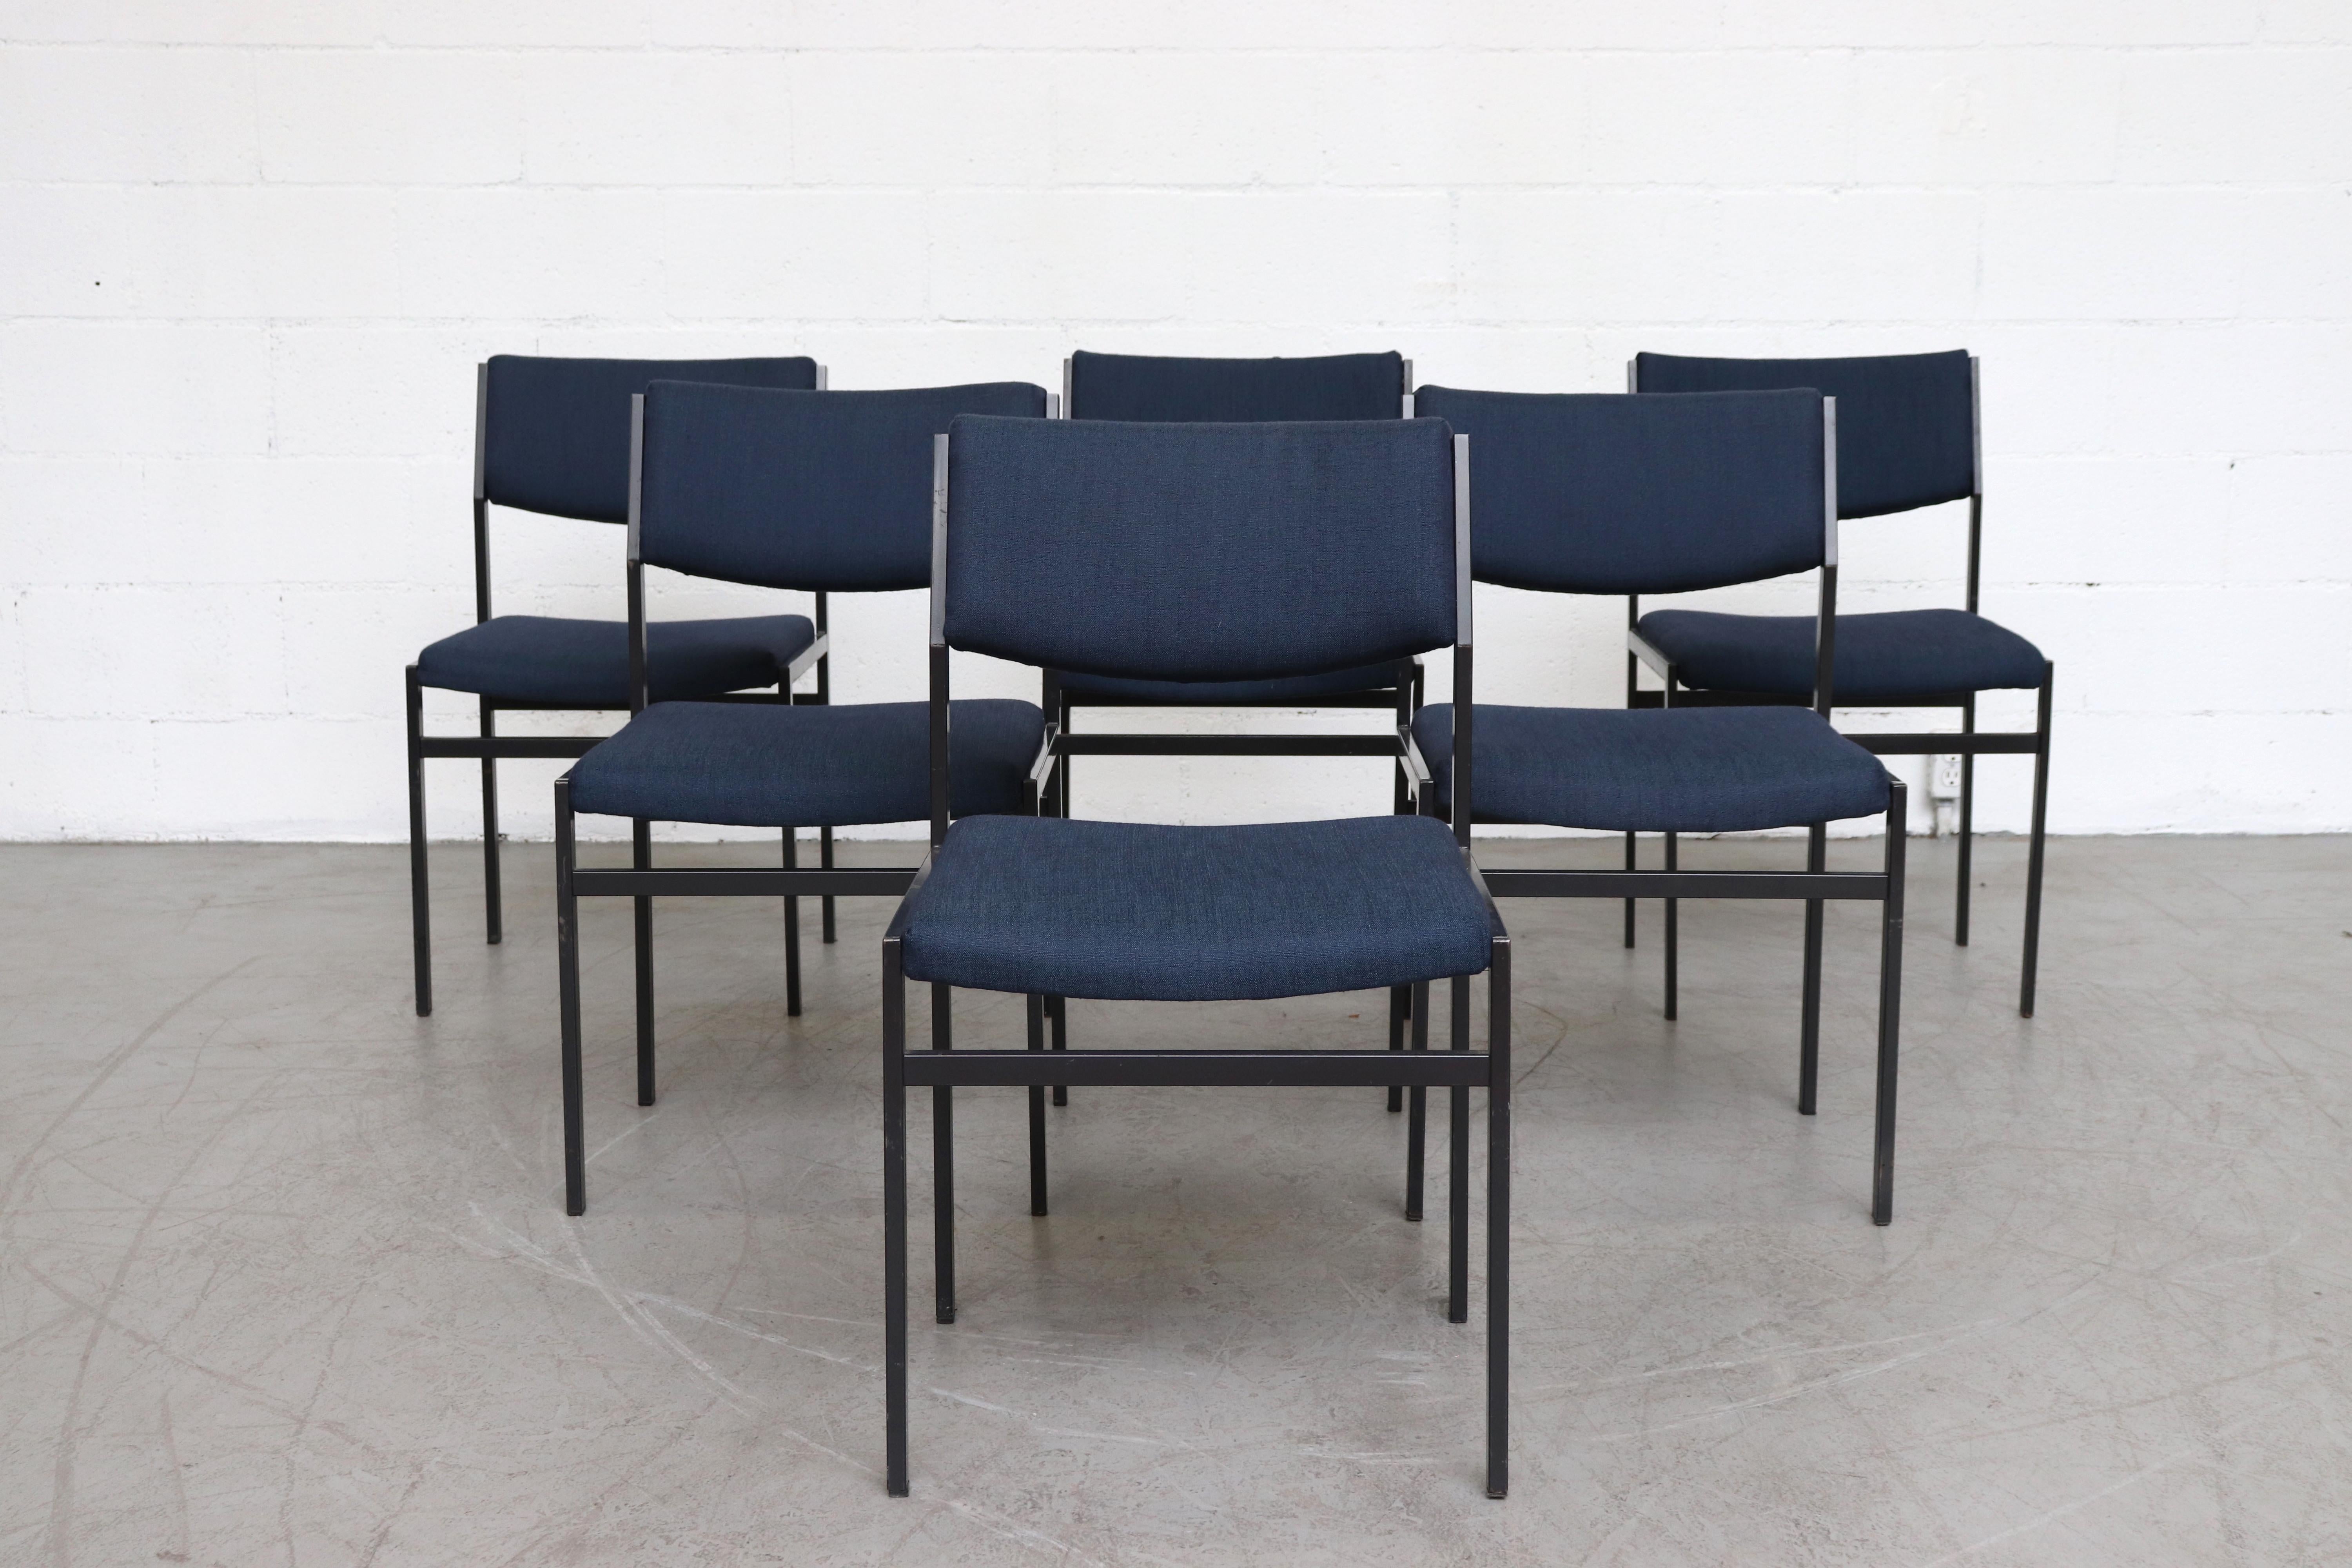 Newly upholstered set of 6 dining chairs in indigo fabric with original enameled metal frames, slight crescent moon shaped backs. Frames in original condition with visible wear and some paint loss and scratching. Set price.